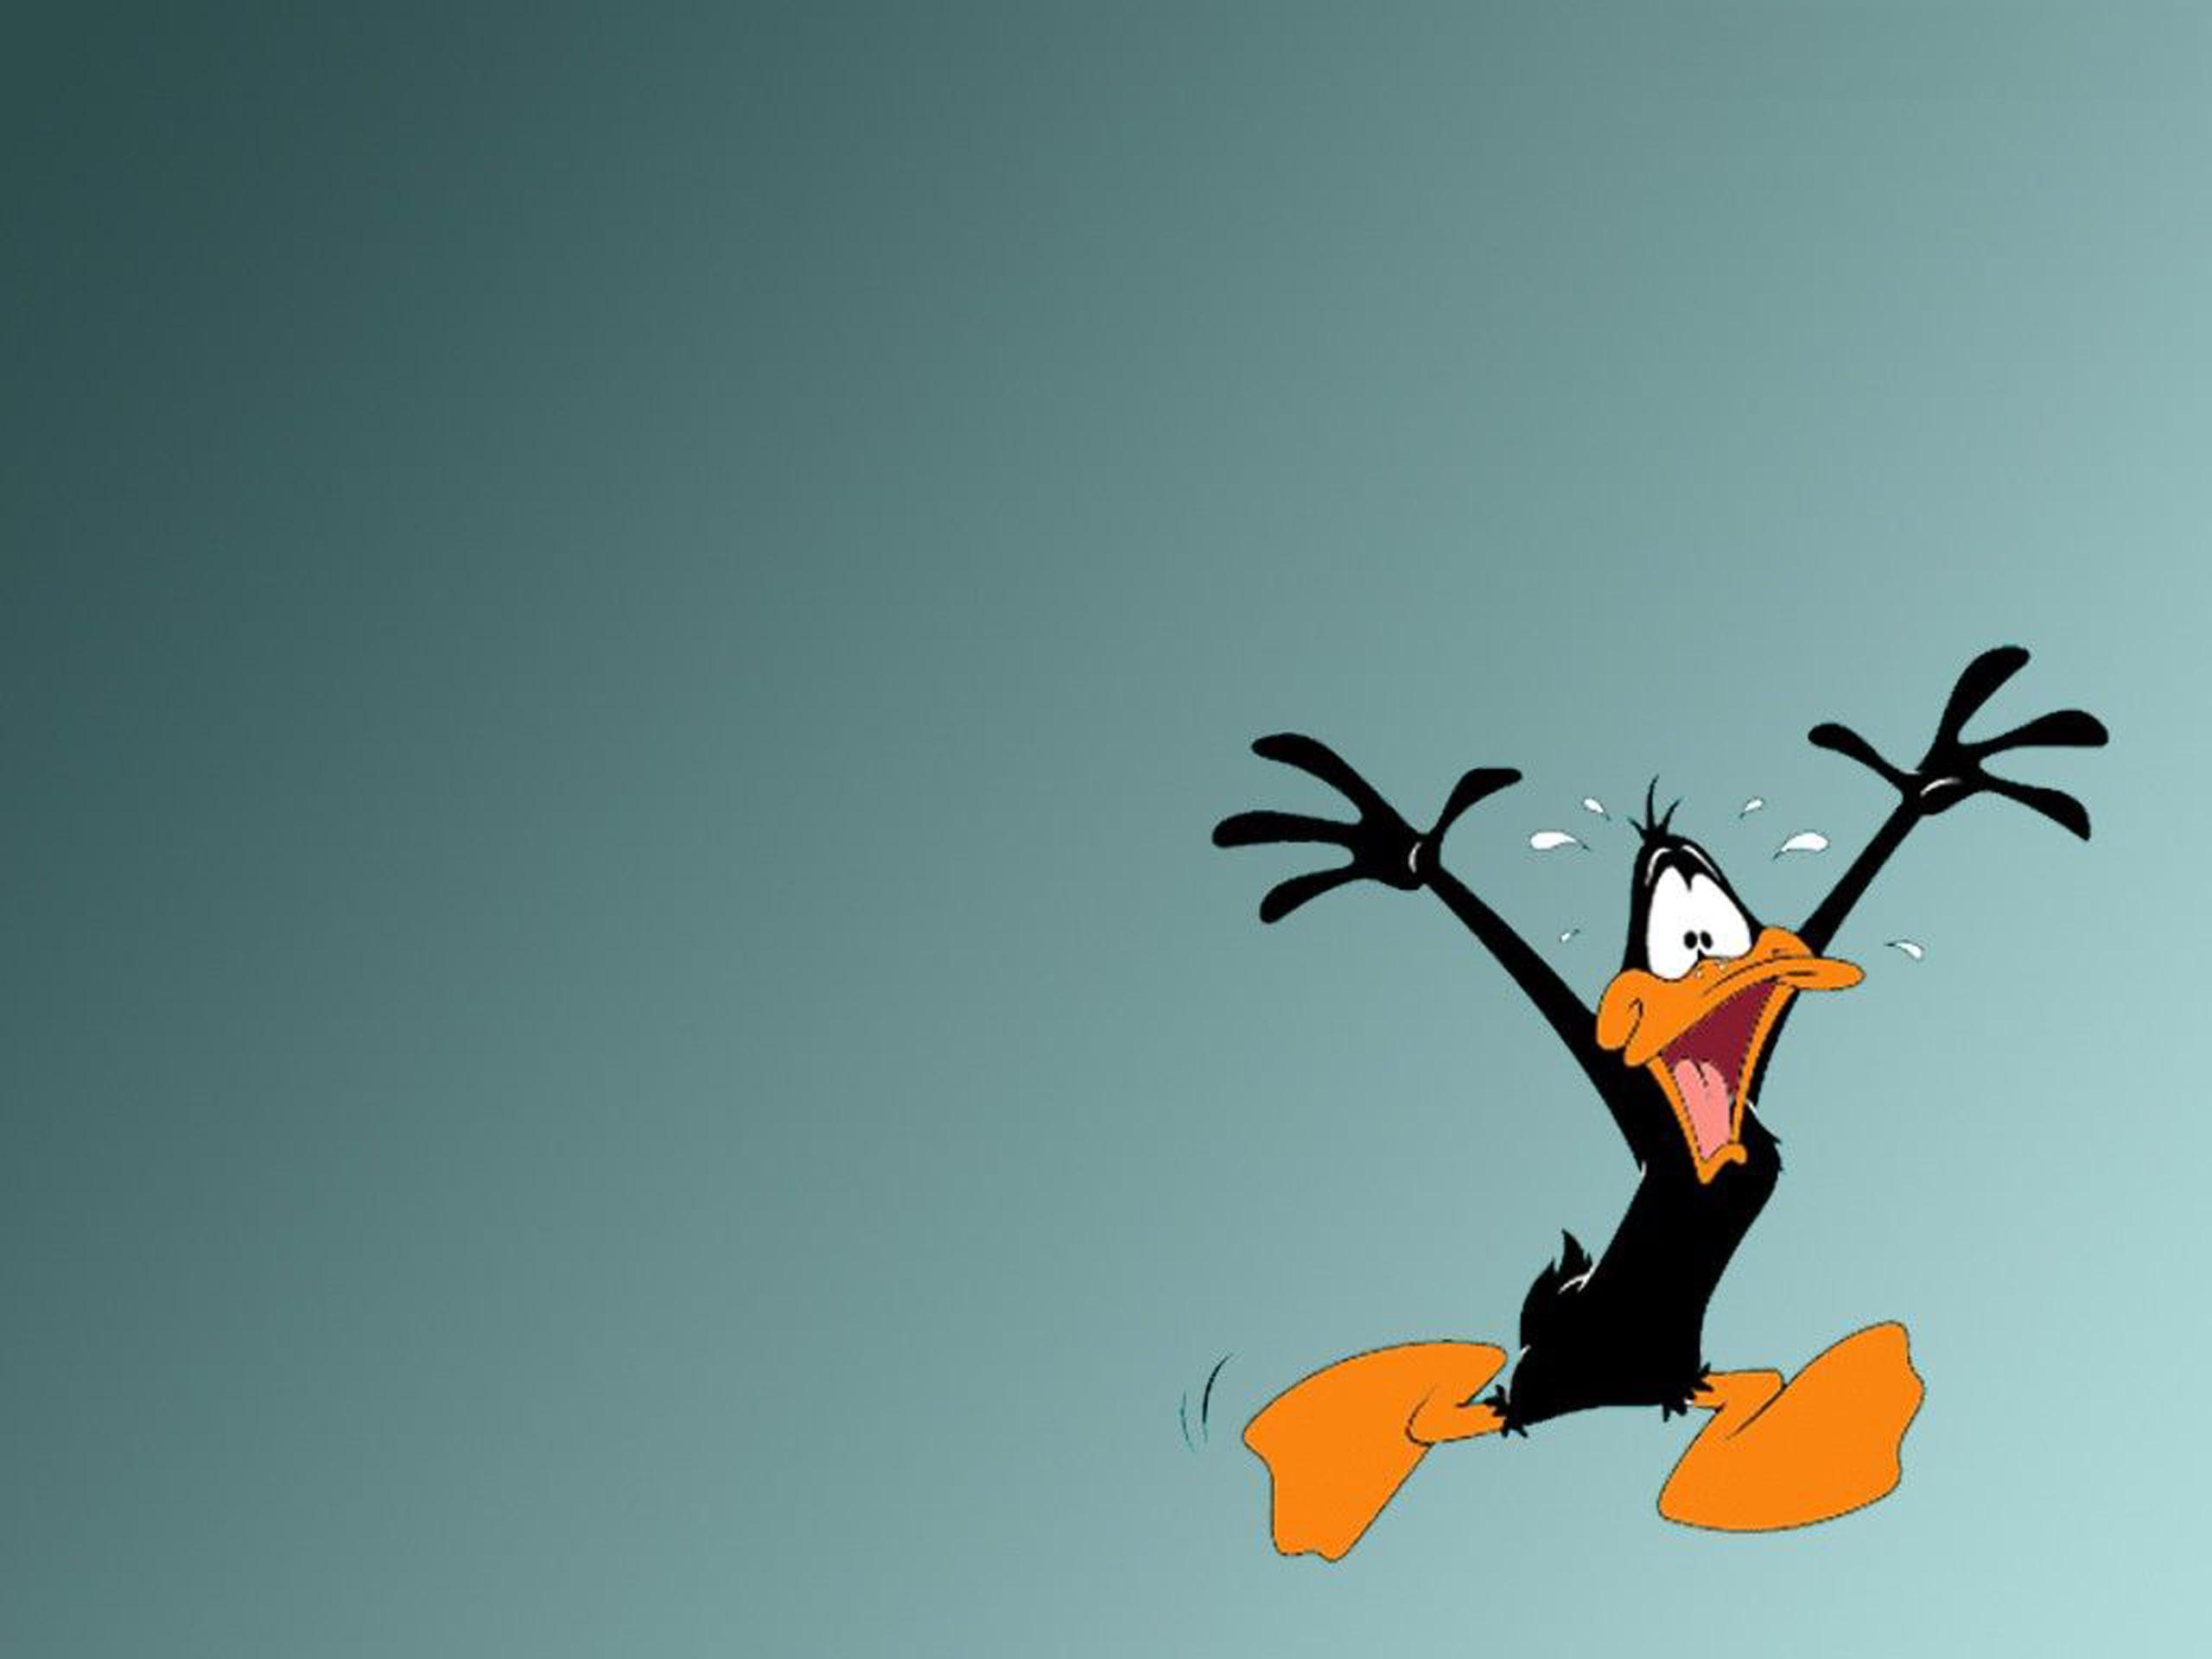 daffy duck and bugs bunny wallpaper